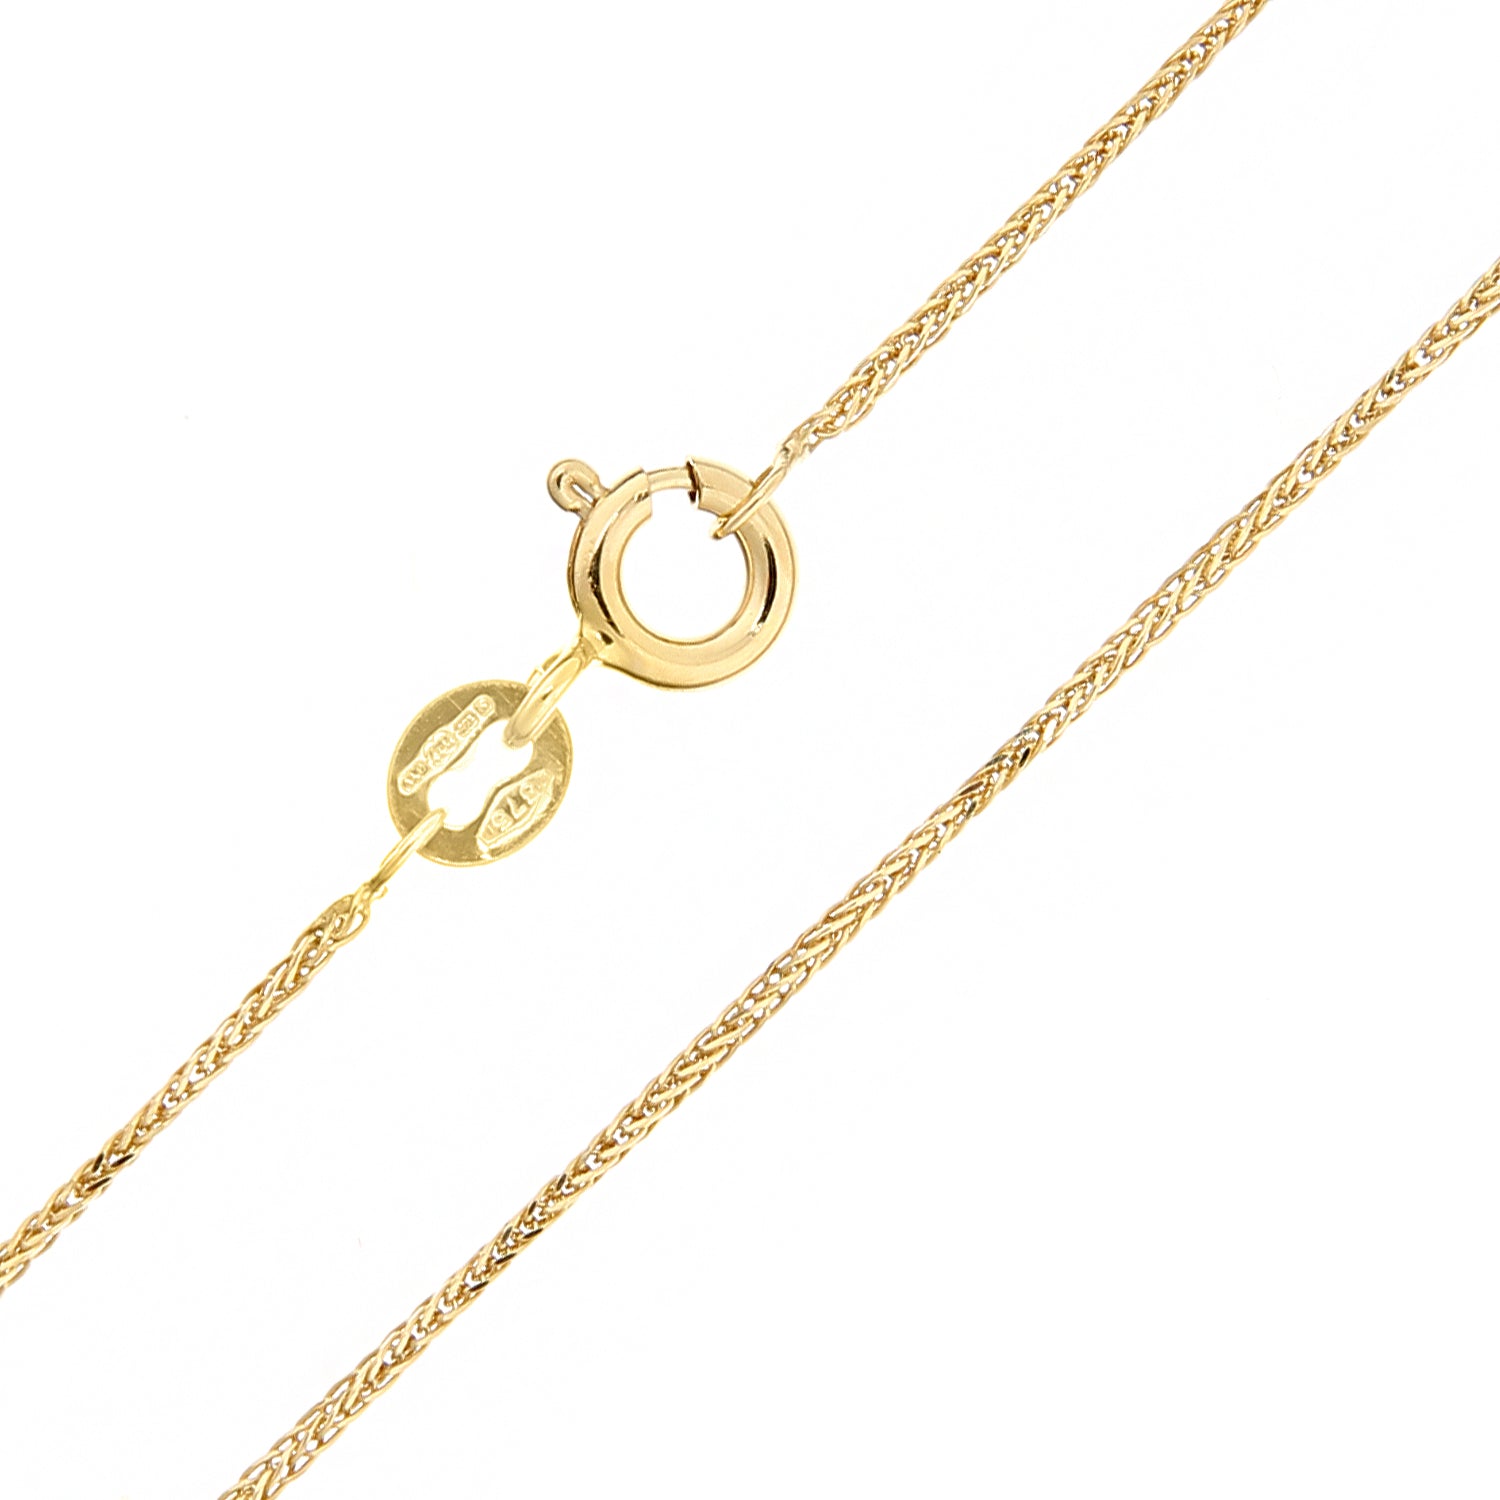 9ct Gold  Smooth Snake-like Spiga Pendant Chain Necklace 1mm - SPMAXLD20Y